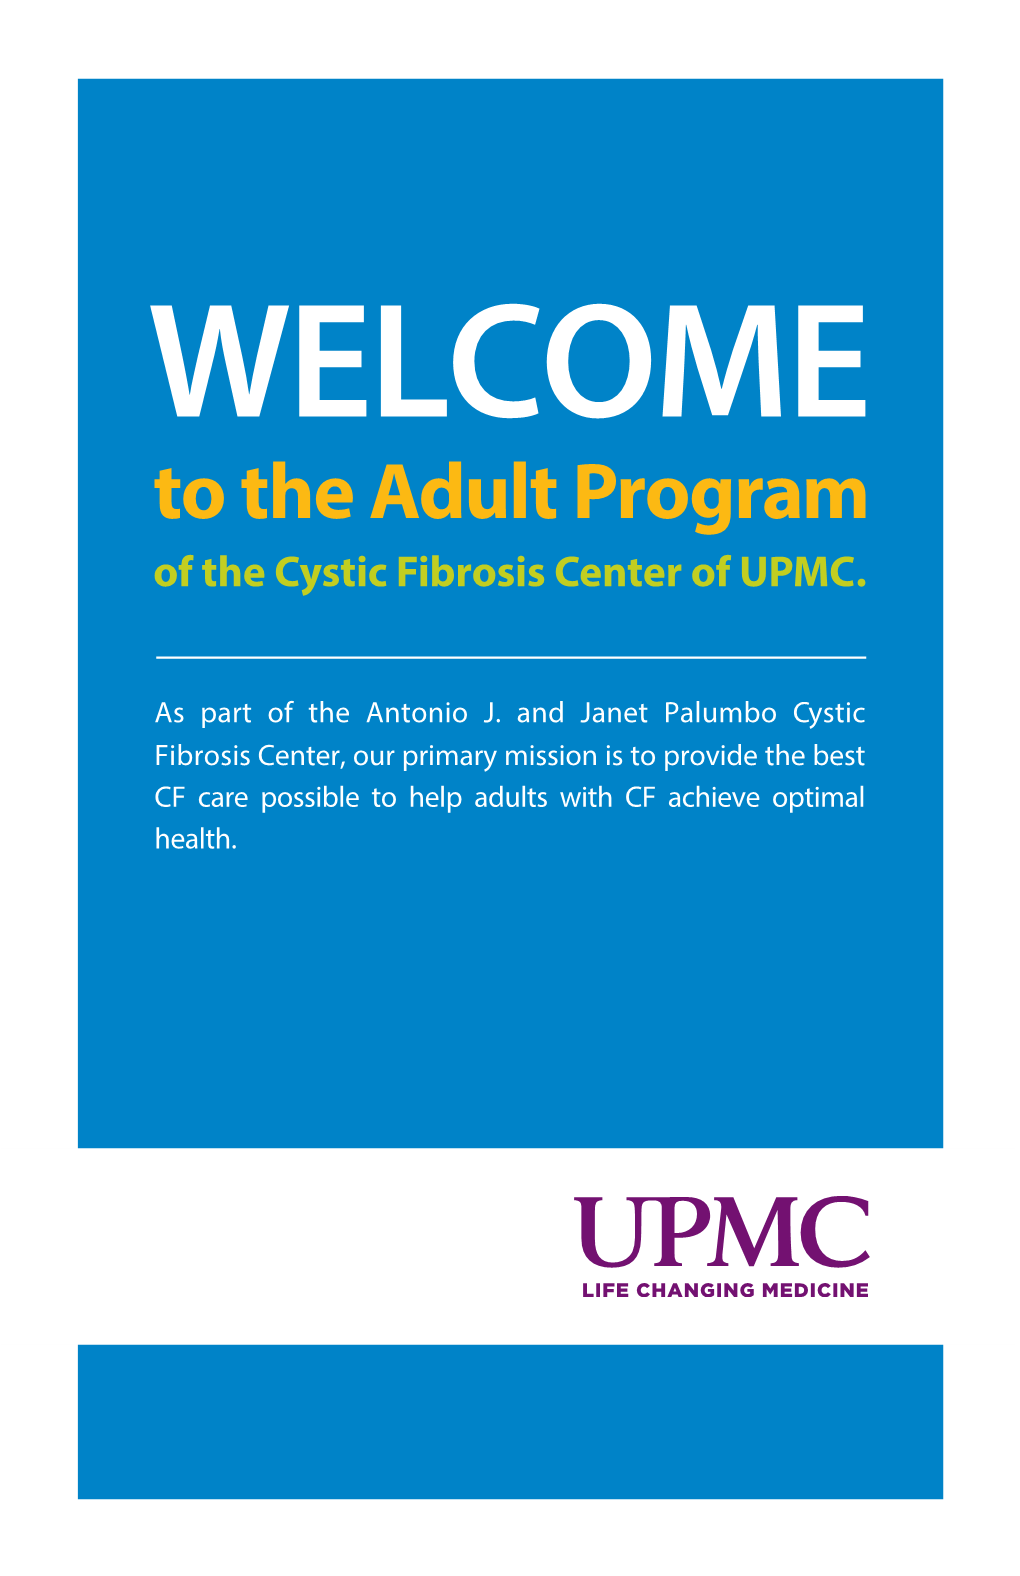 To the Adult Program of the Cystic Fibrosis Center of UPMC